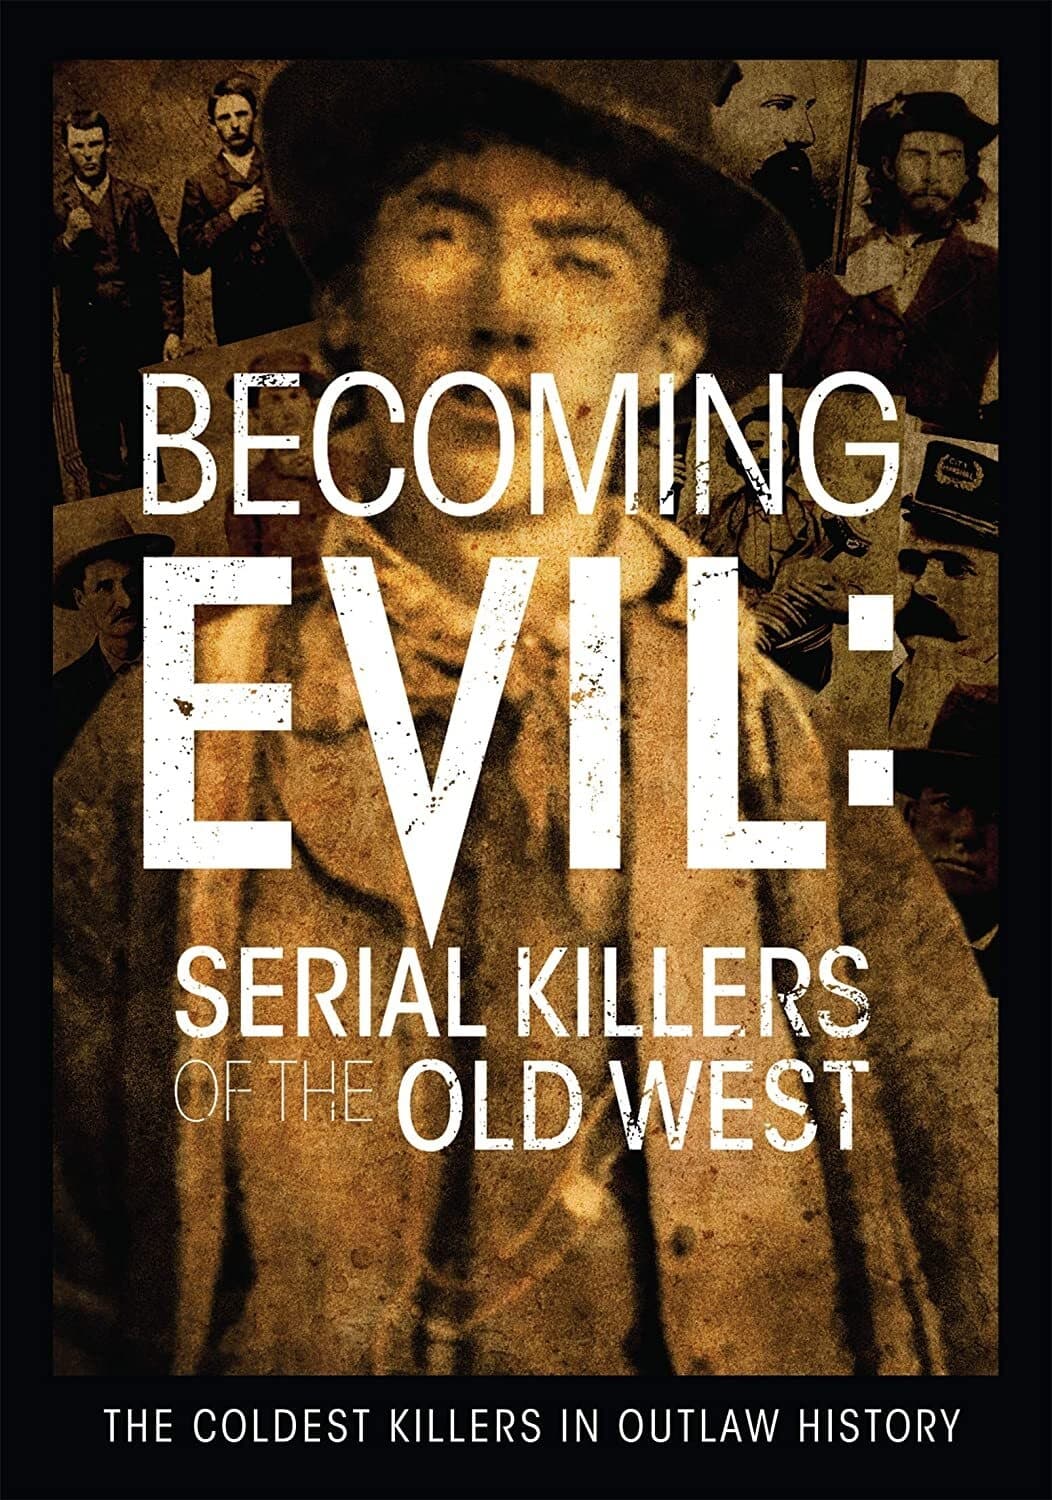 Becoming Evil: Serial Killers of the Old West